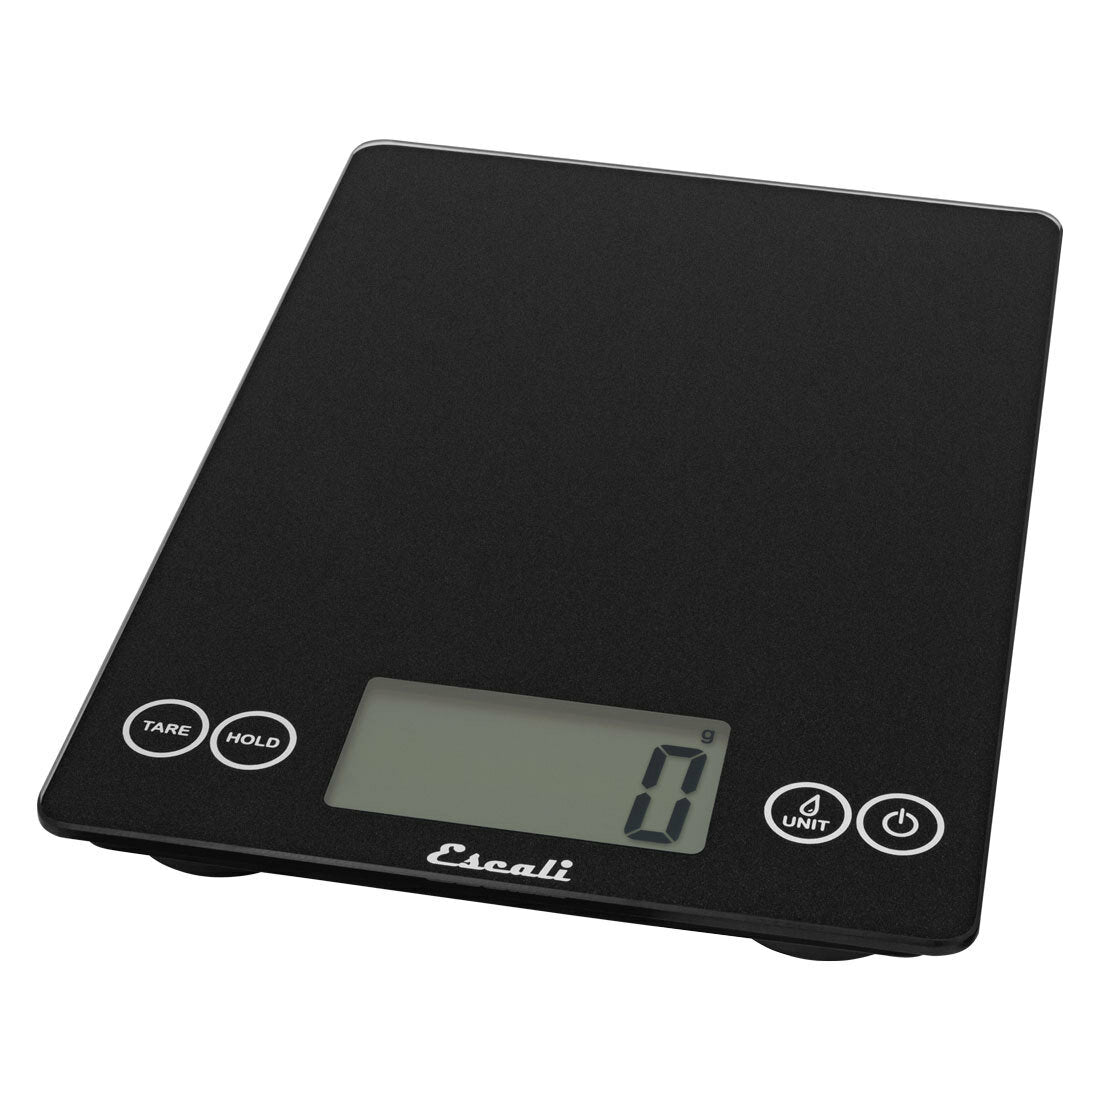 Digital Kitchen Scale Digital Weight Grams and Ounces (Black Glass)